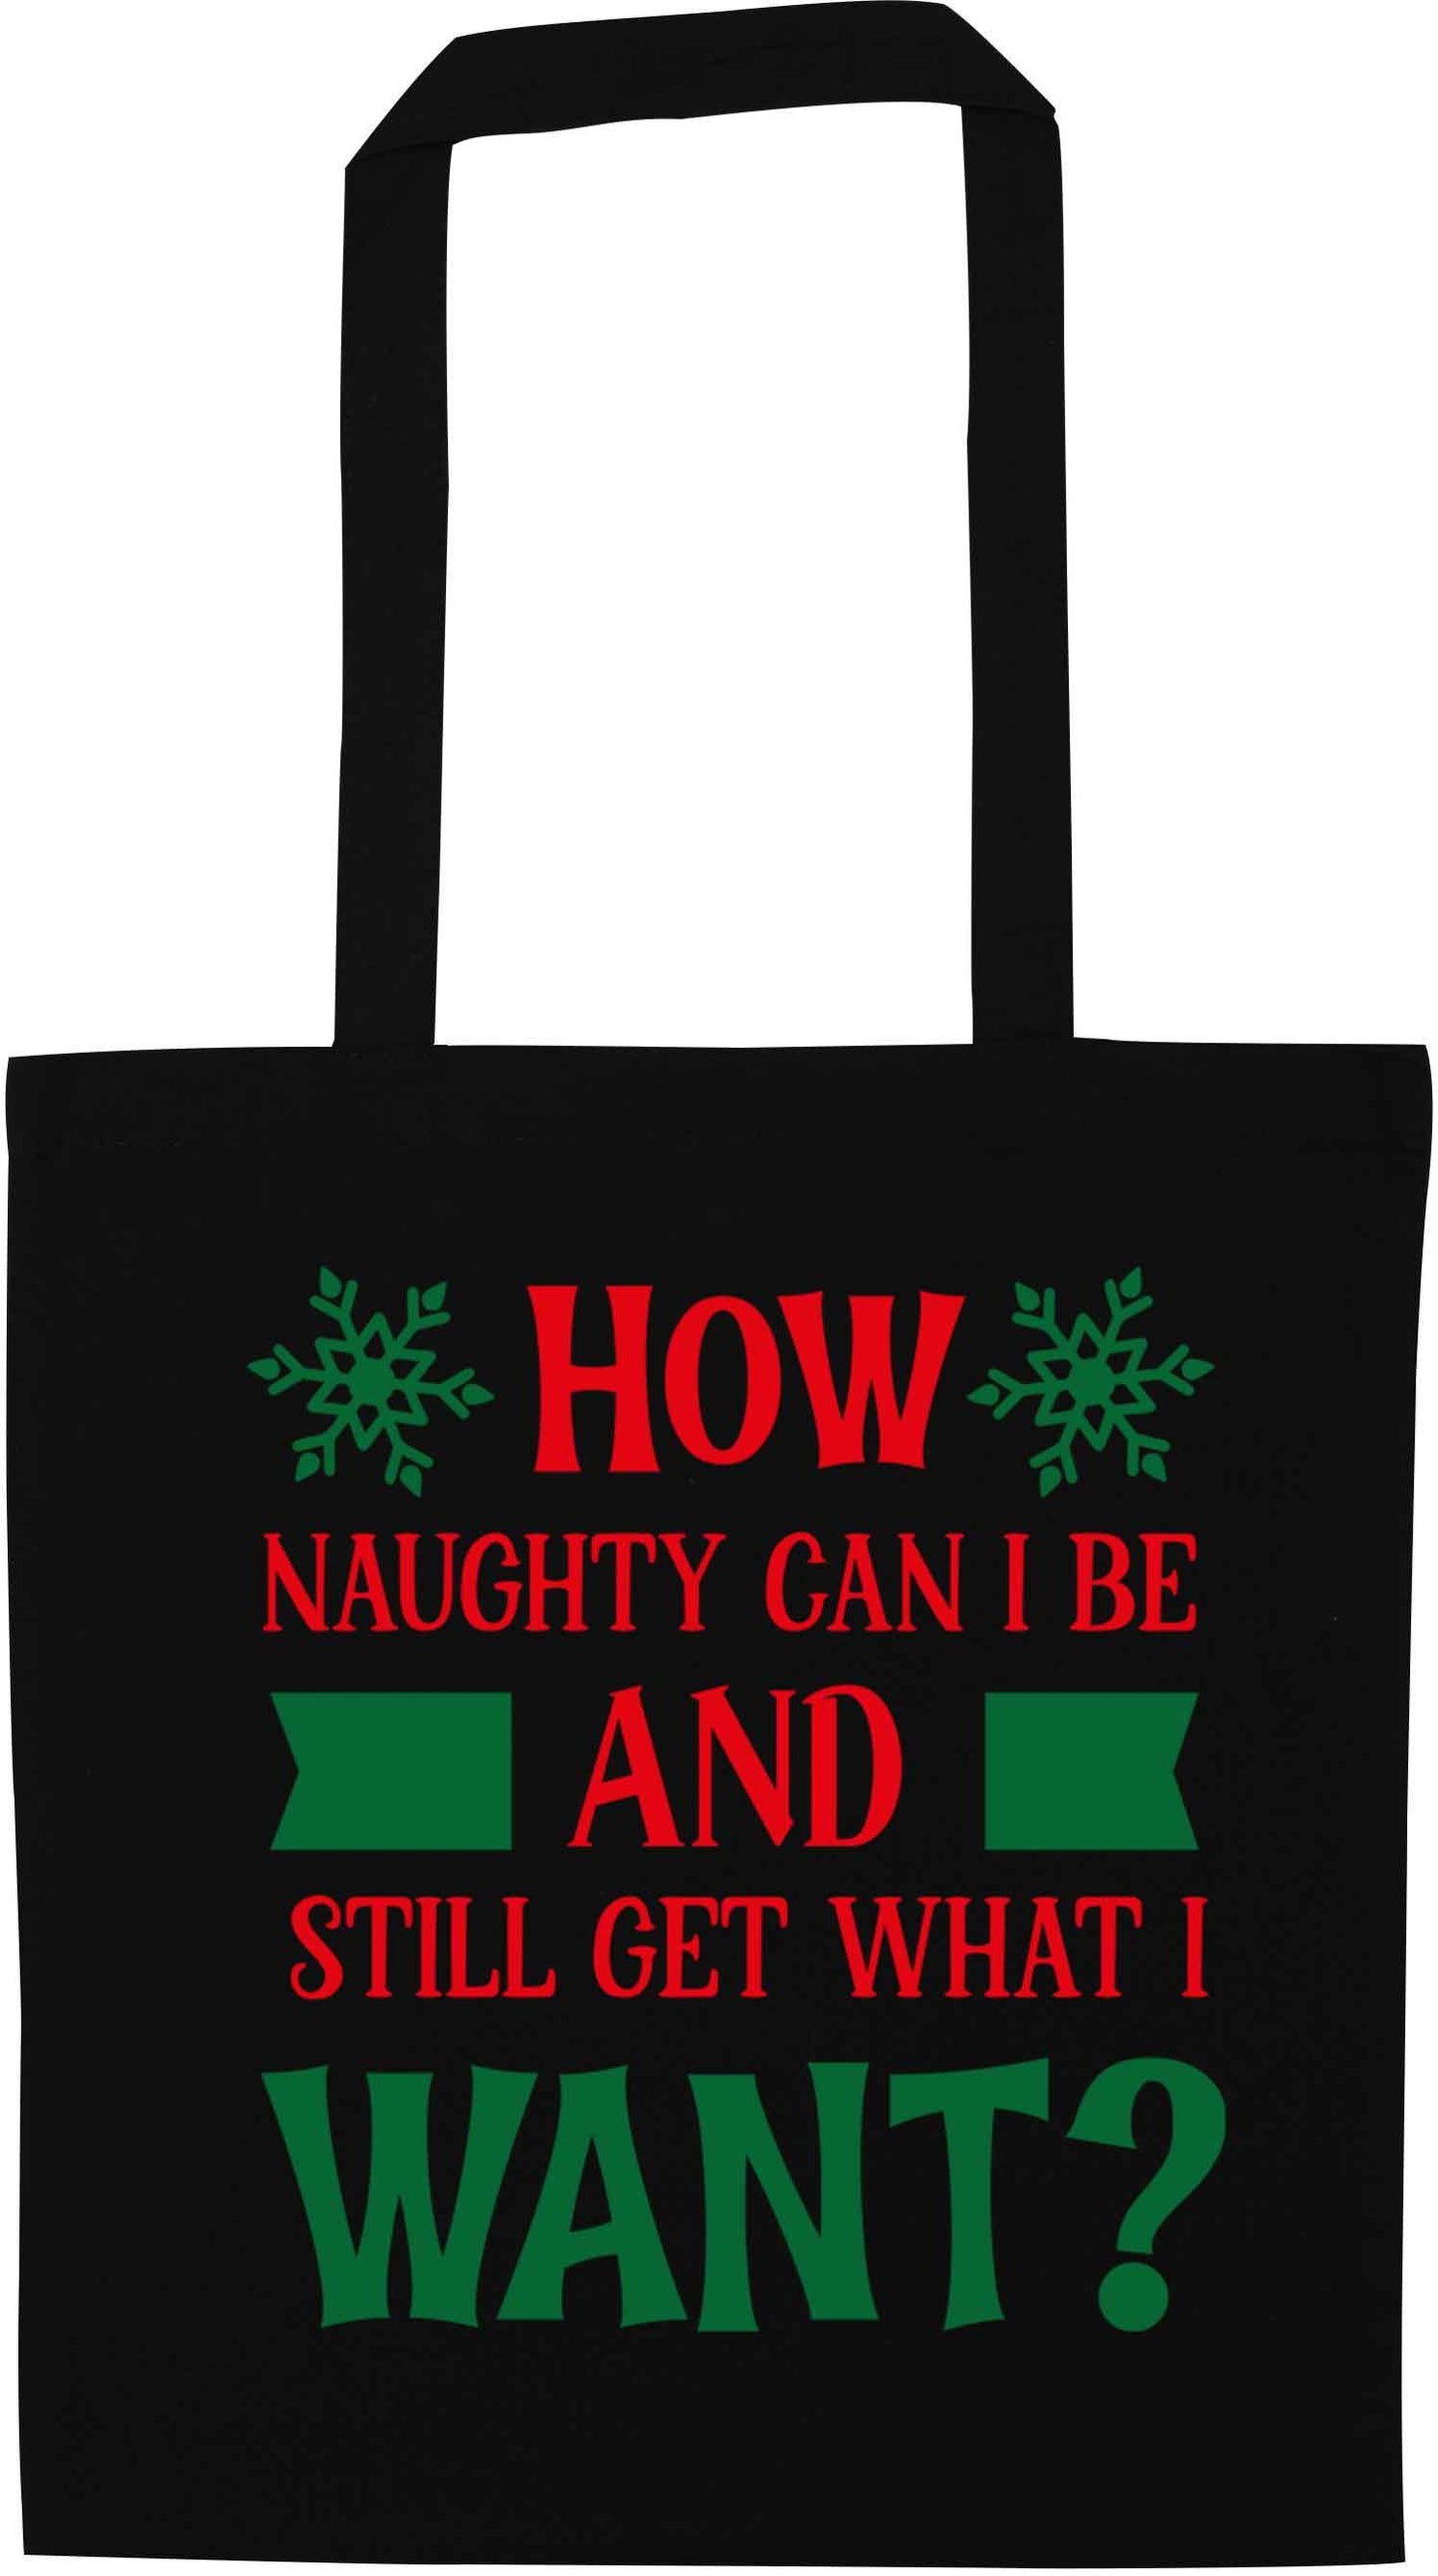 How naughty can I be and still get what I want? black tote bag